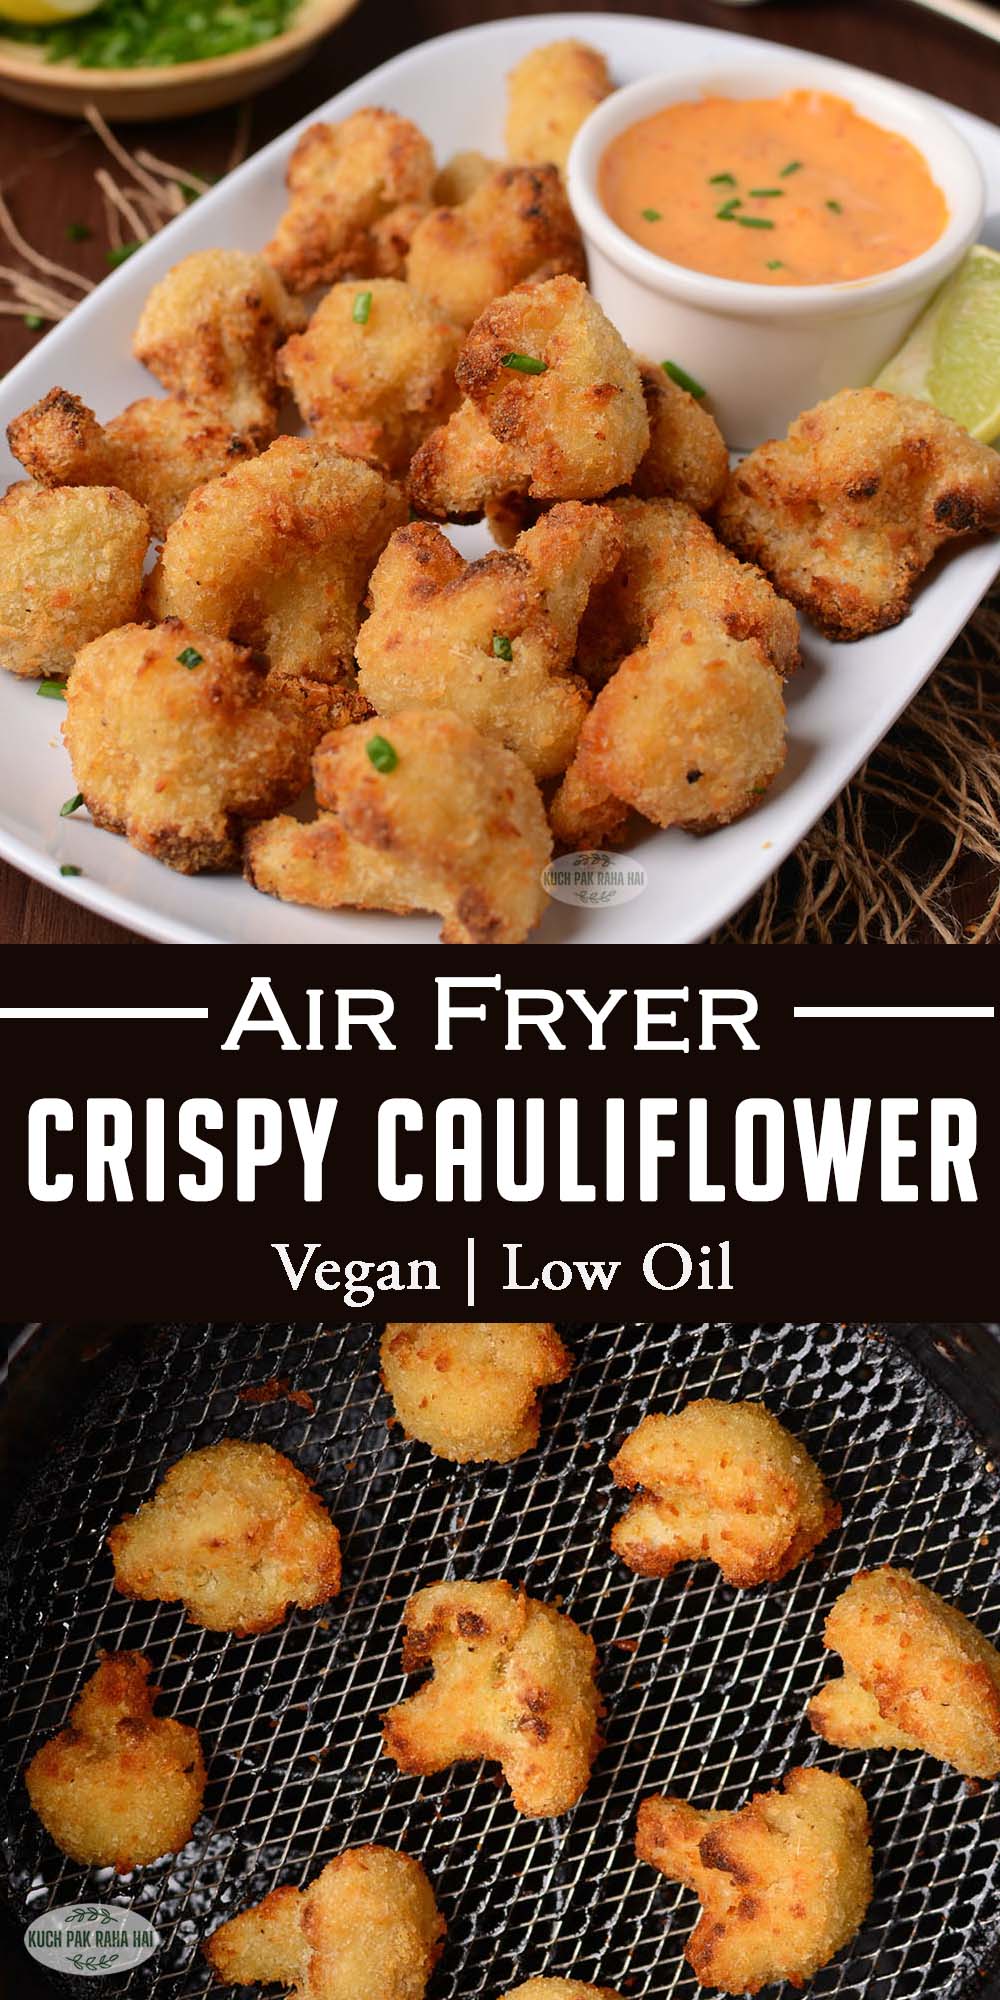 Air fryer breaded cauliflower bites without egg.